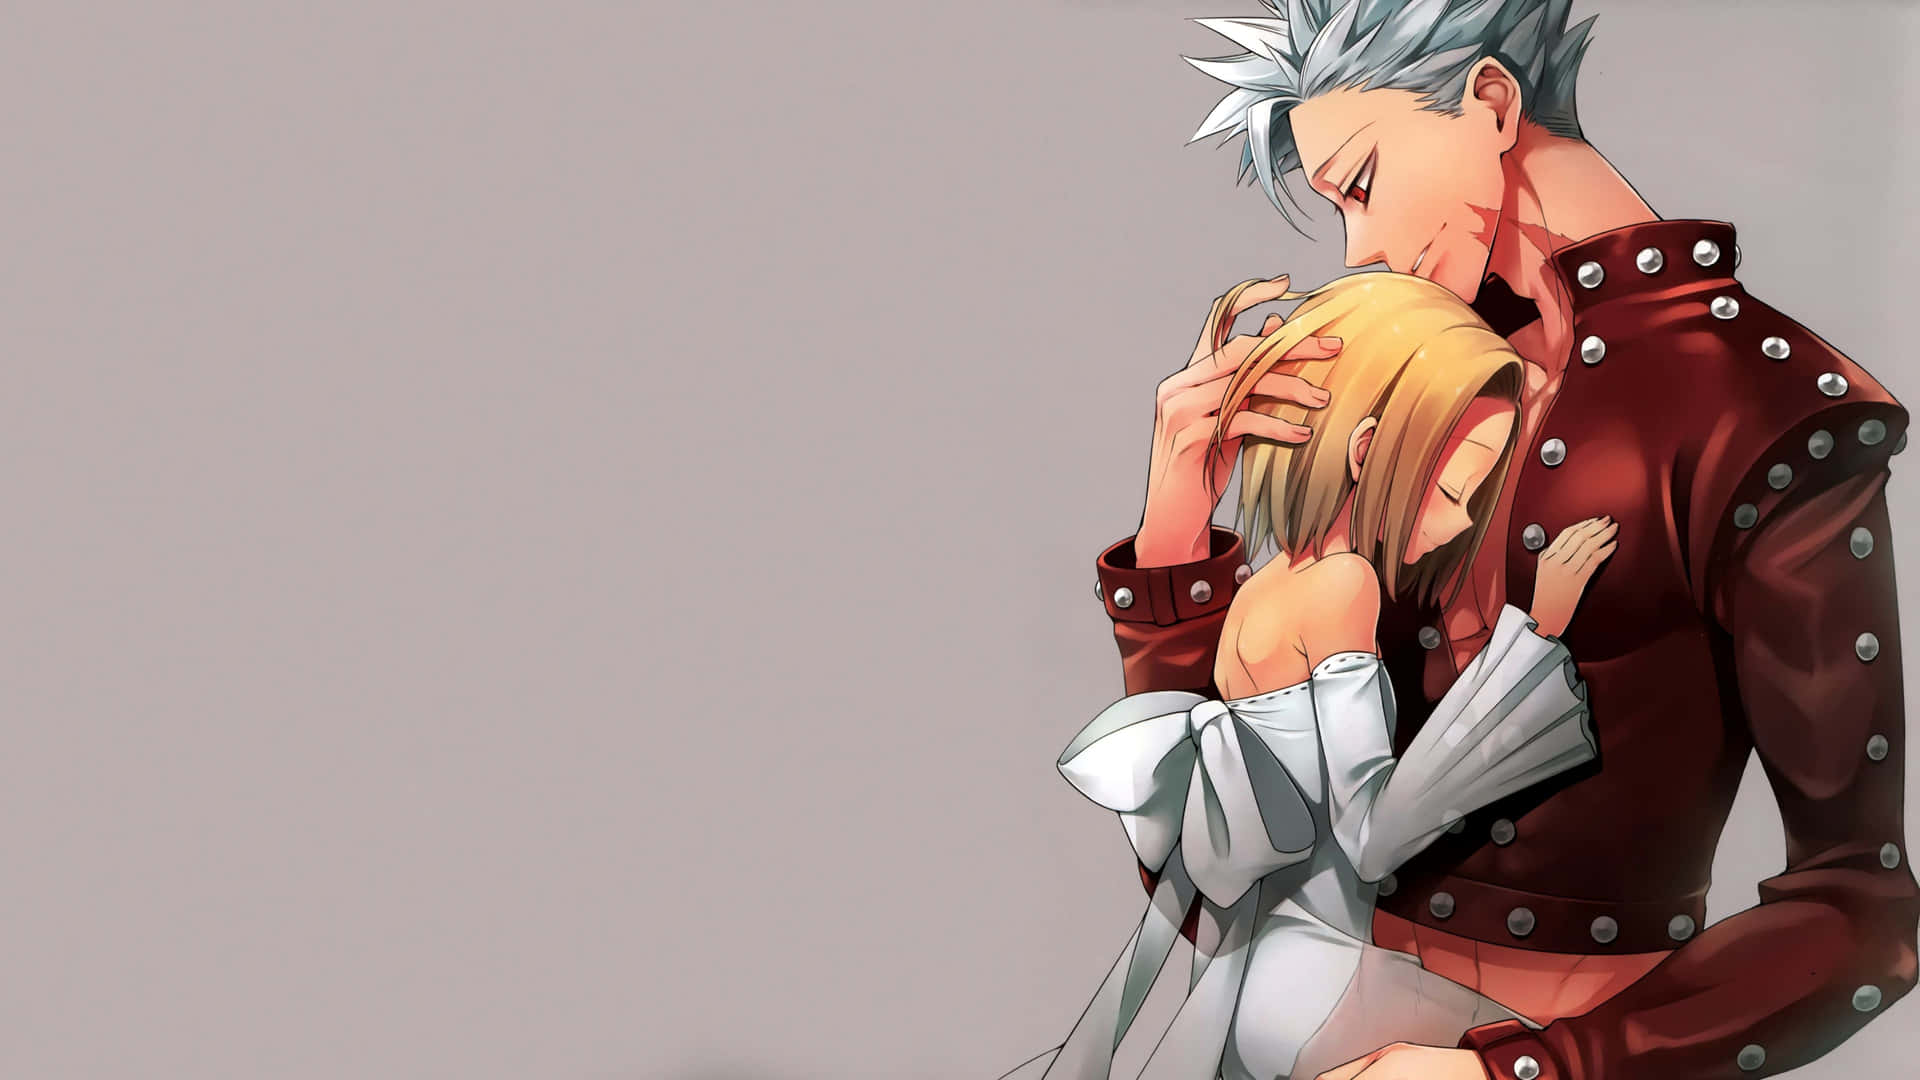 The Enigmatic and Charismatic Ban from Seven Deadly Sins Wallpaper